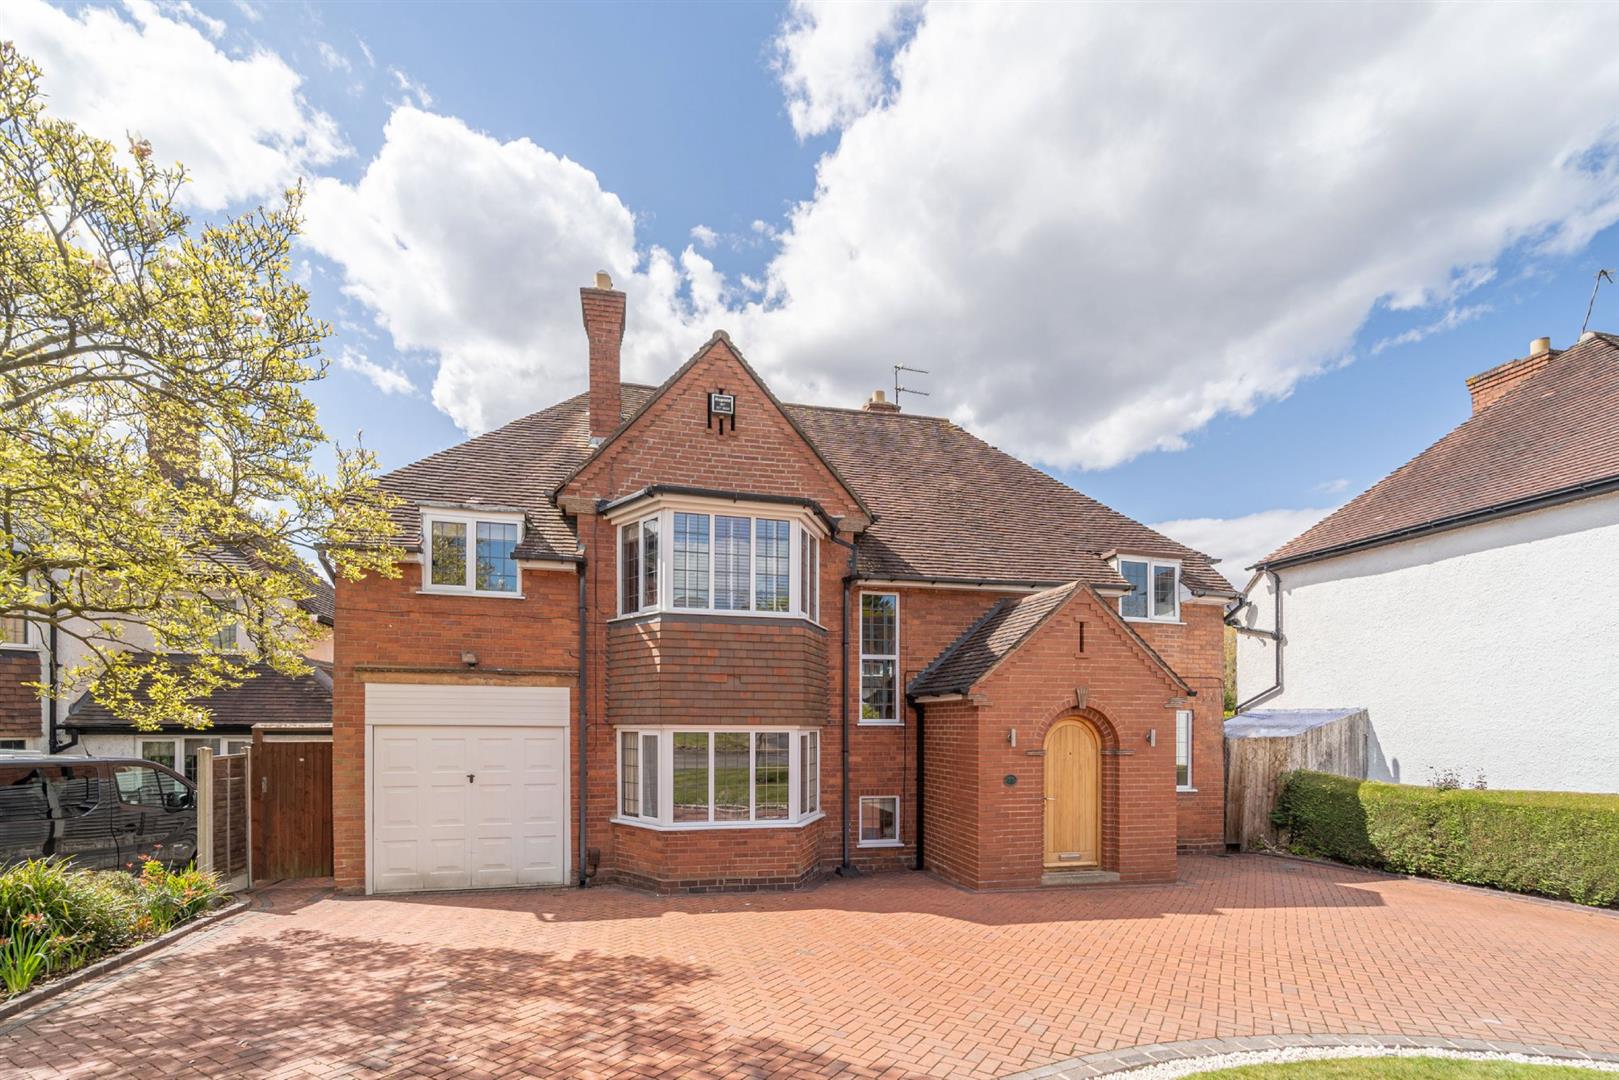 4 bed  for sale in Park Avenue, Solihull, B91 